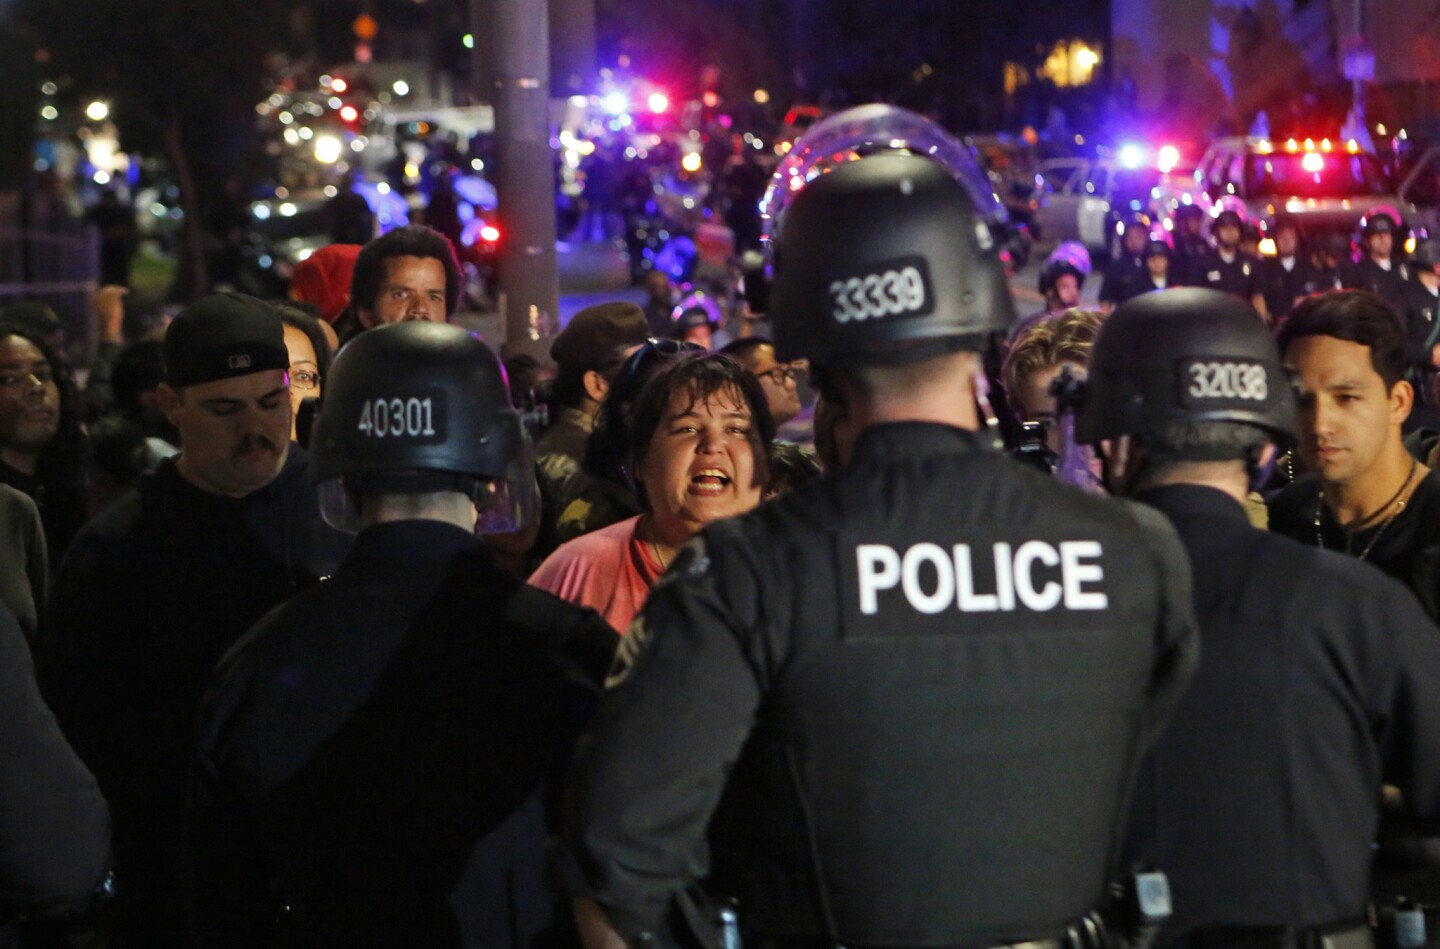 A protester yells at police on Alvarado Street, where demonstrators were blocked from moving forward.